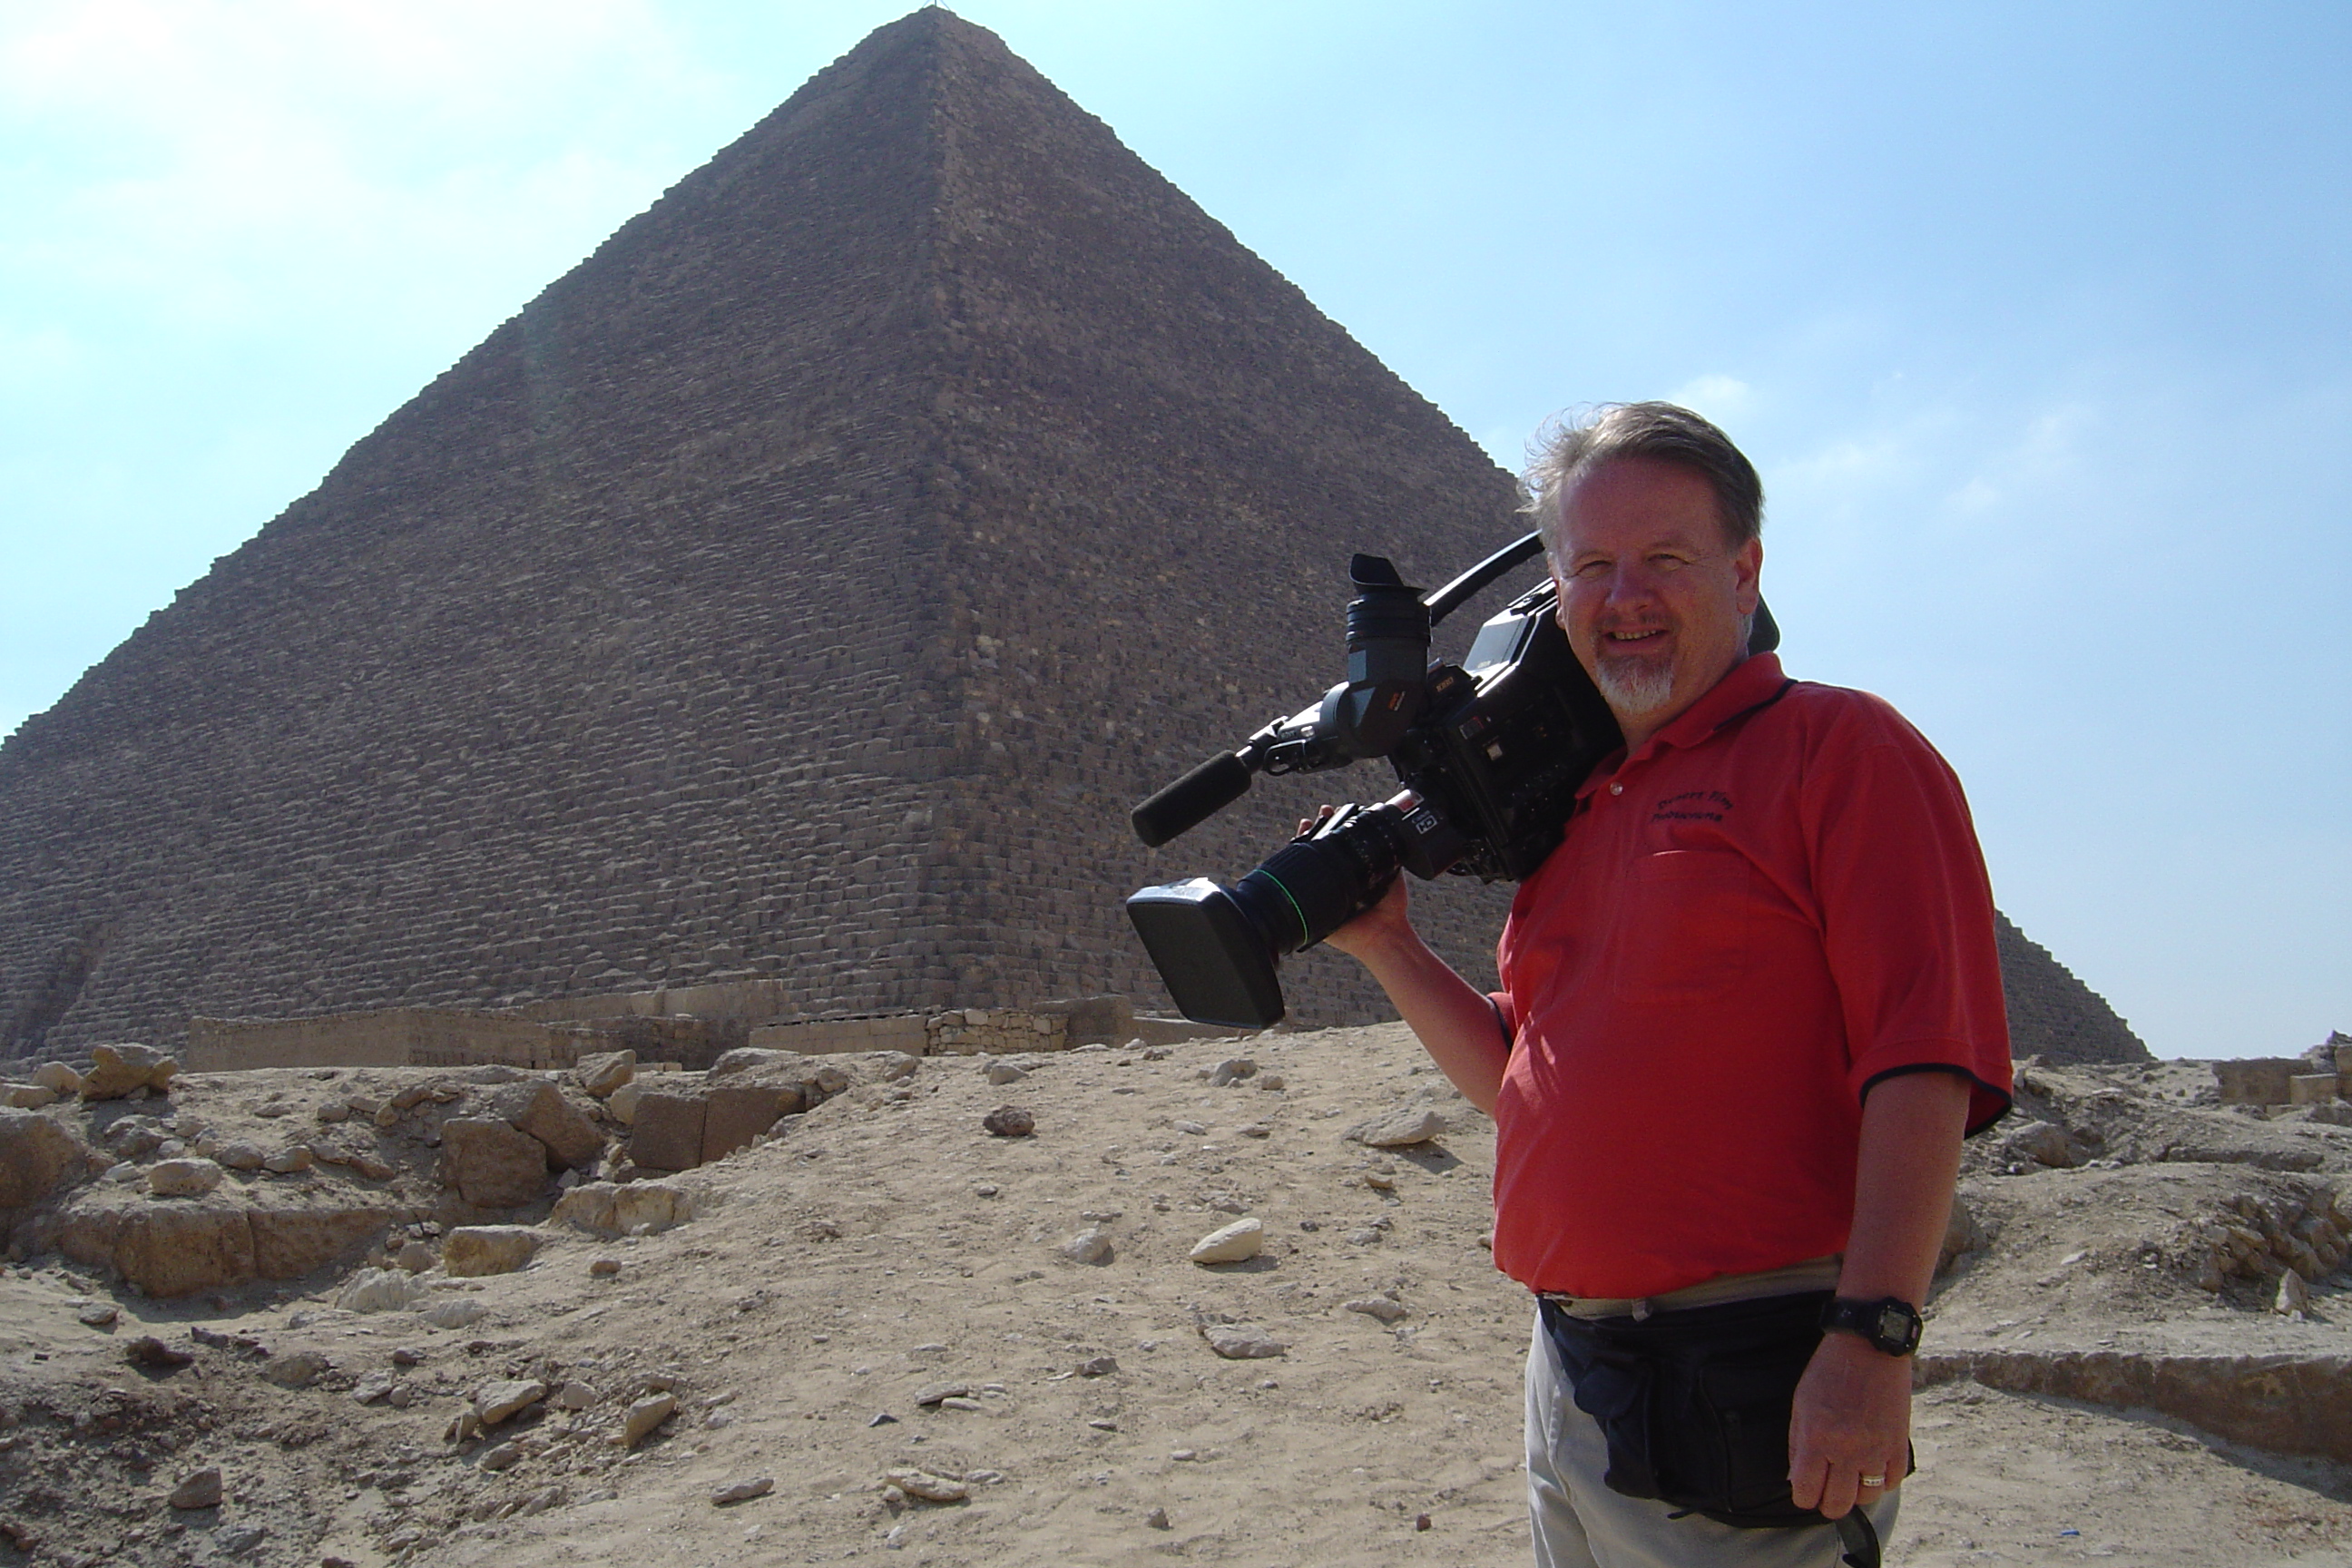 On location at the Giza Plateau outside of Cairo, Egypt, for RIDDLE OF THE EXODUS